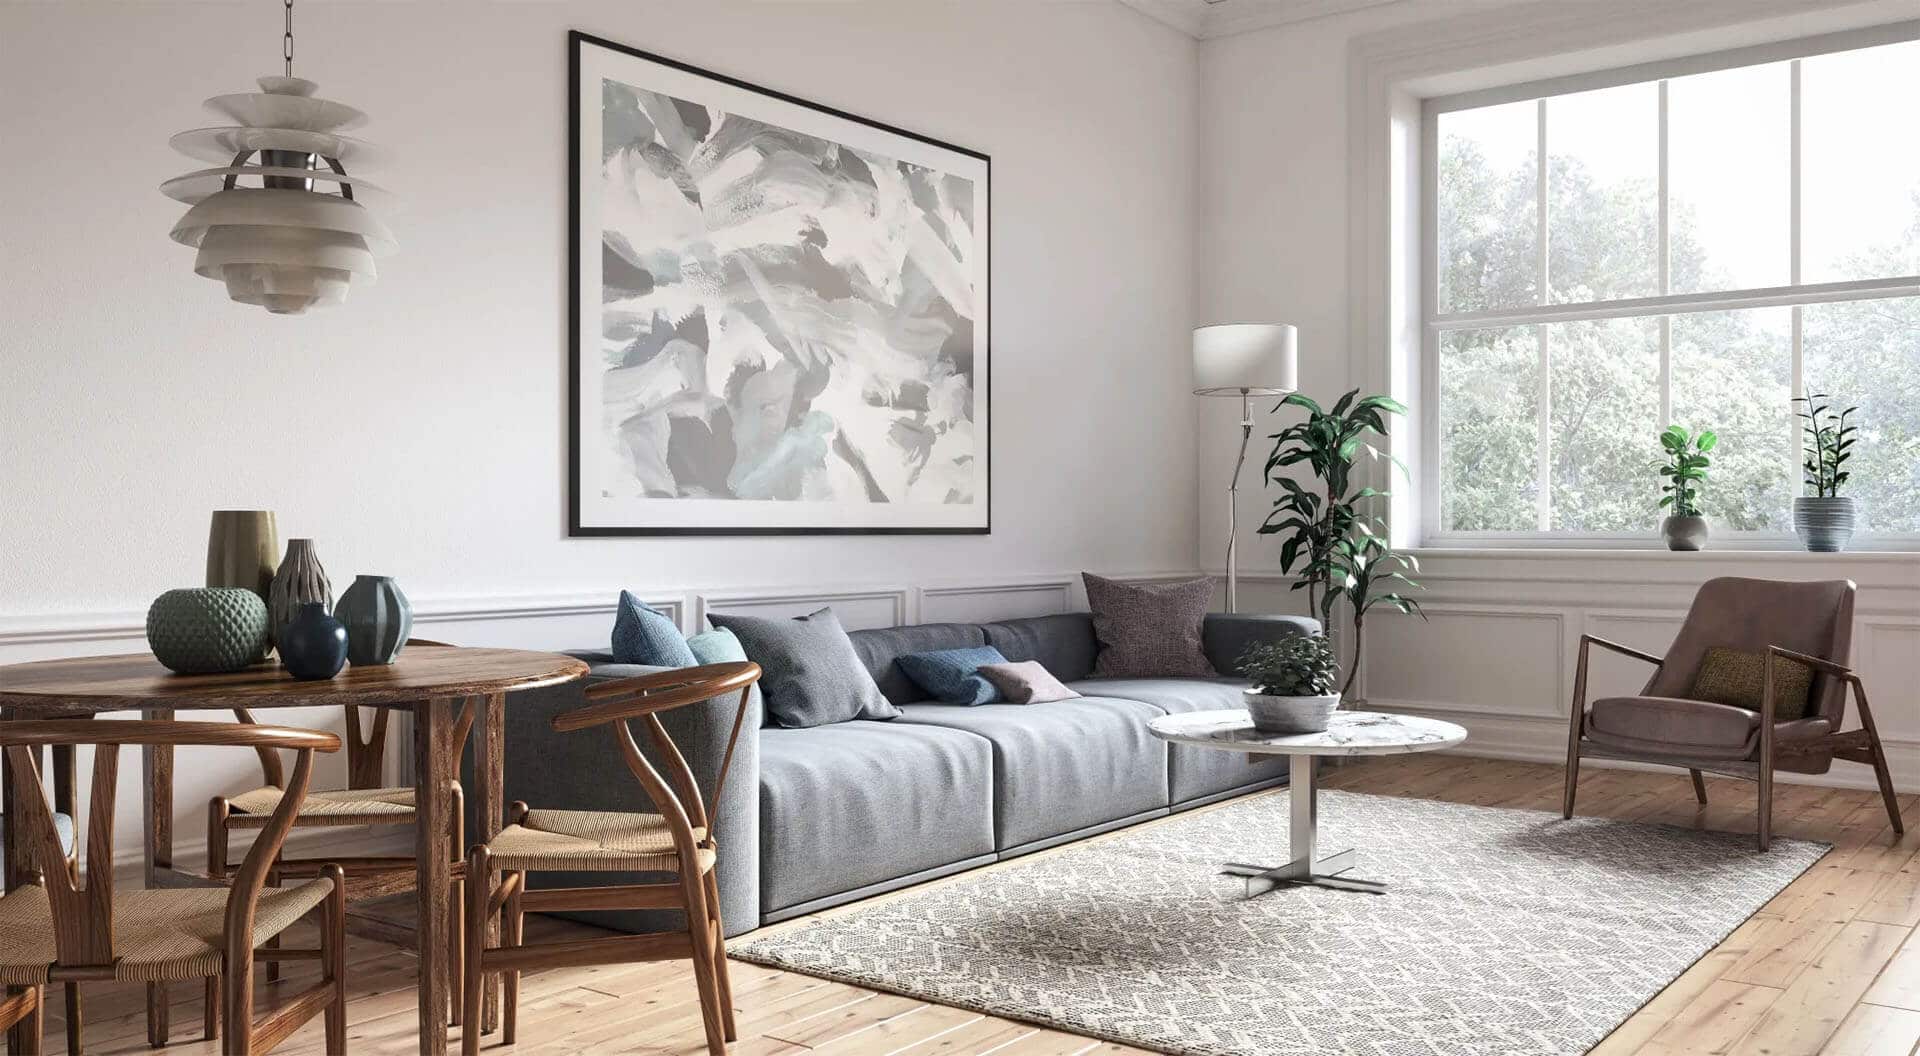 Living room furnished in Scandinavian style